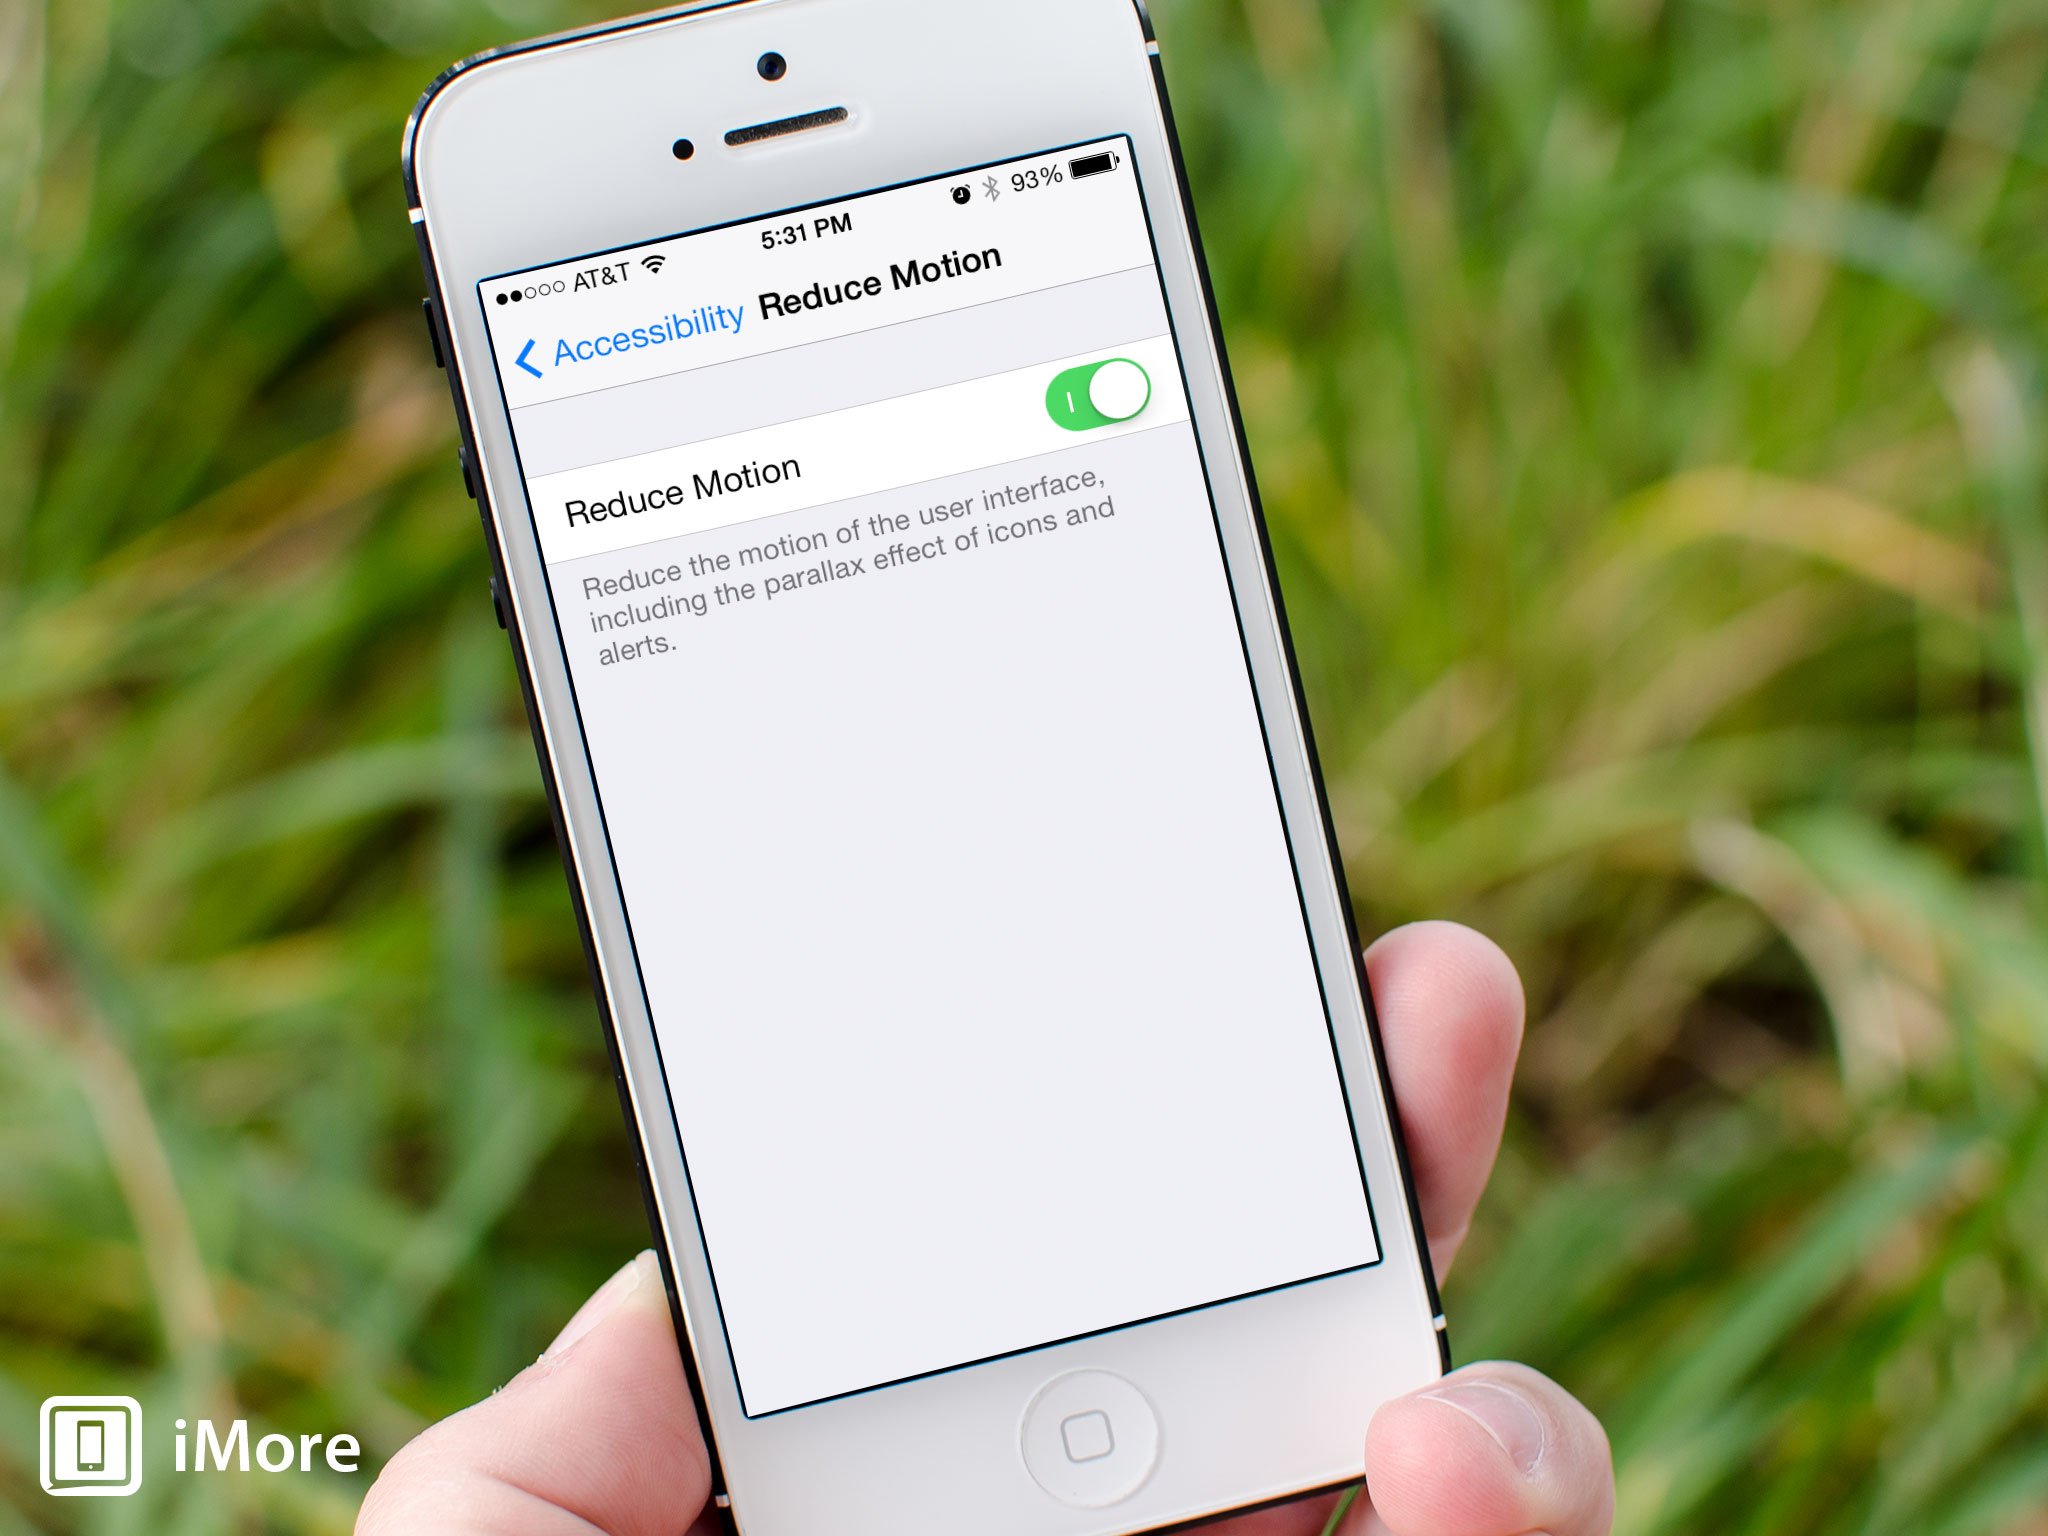 How to reduce motion and speed up transitions on iPhone and iPad with IOS 7.0.3